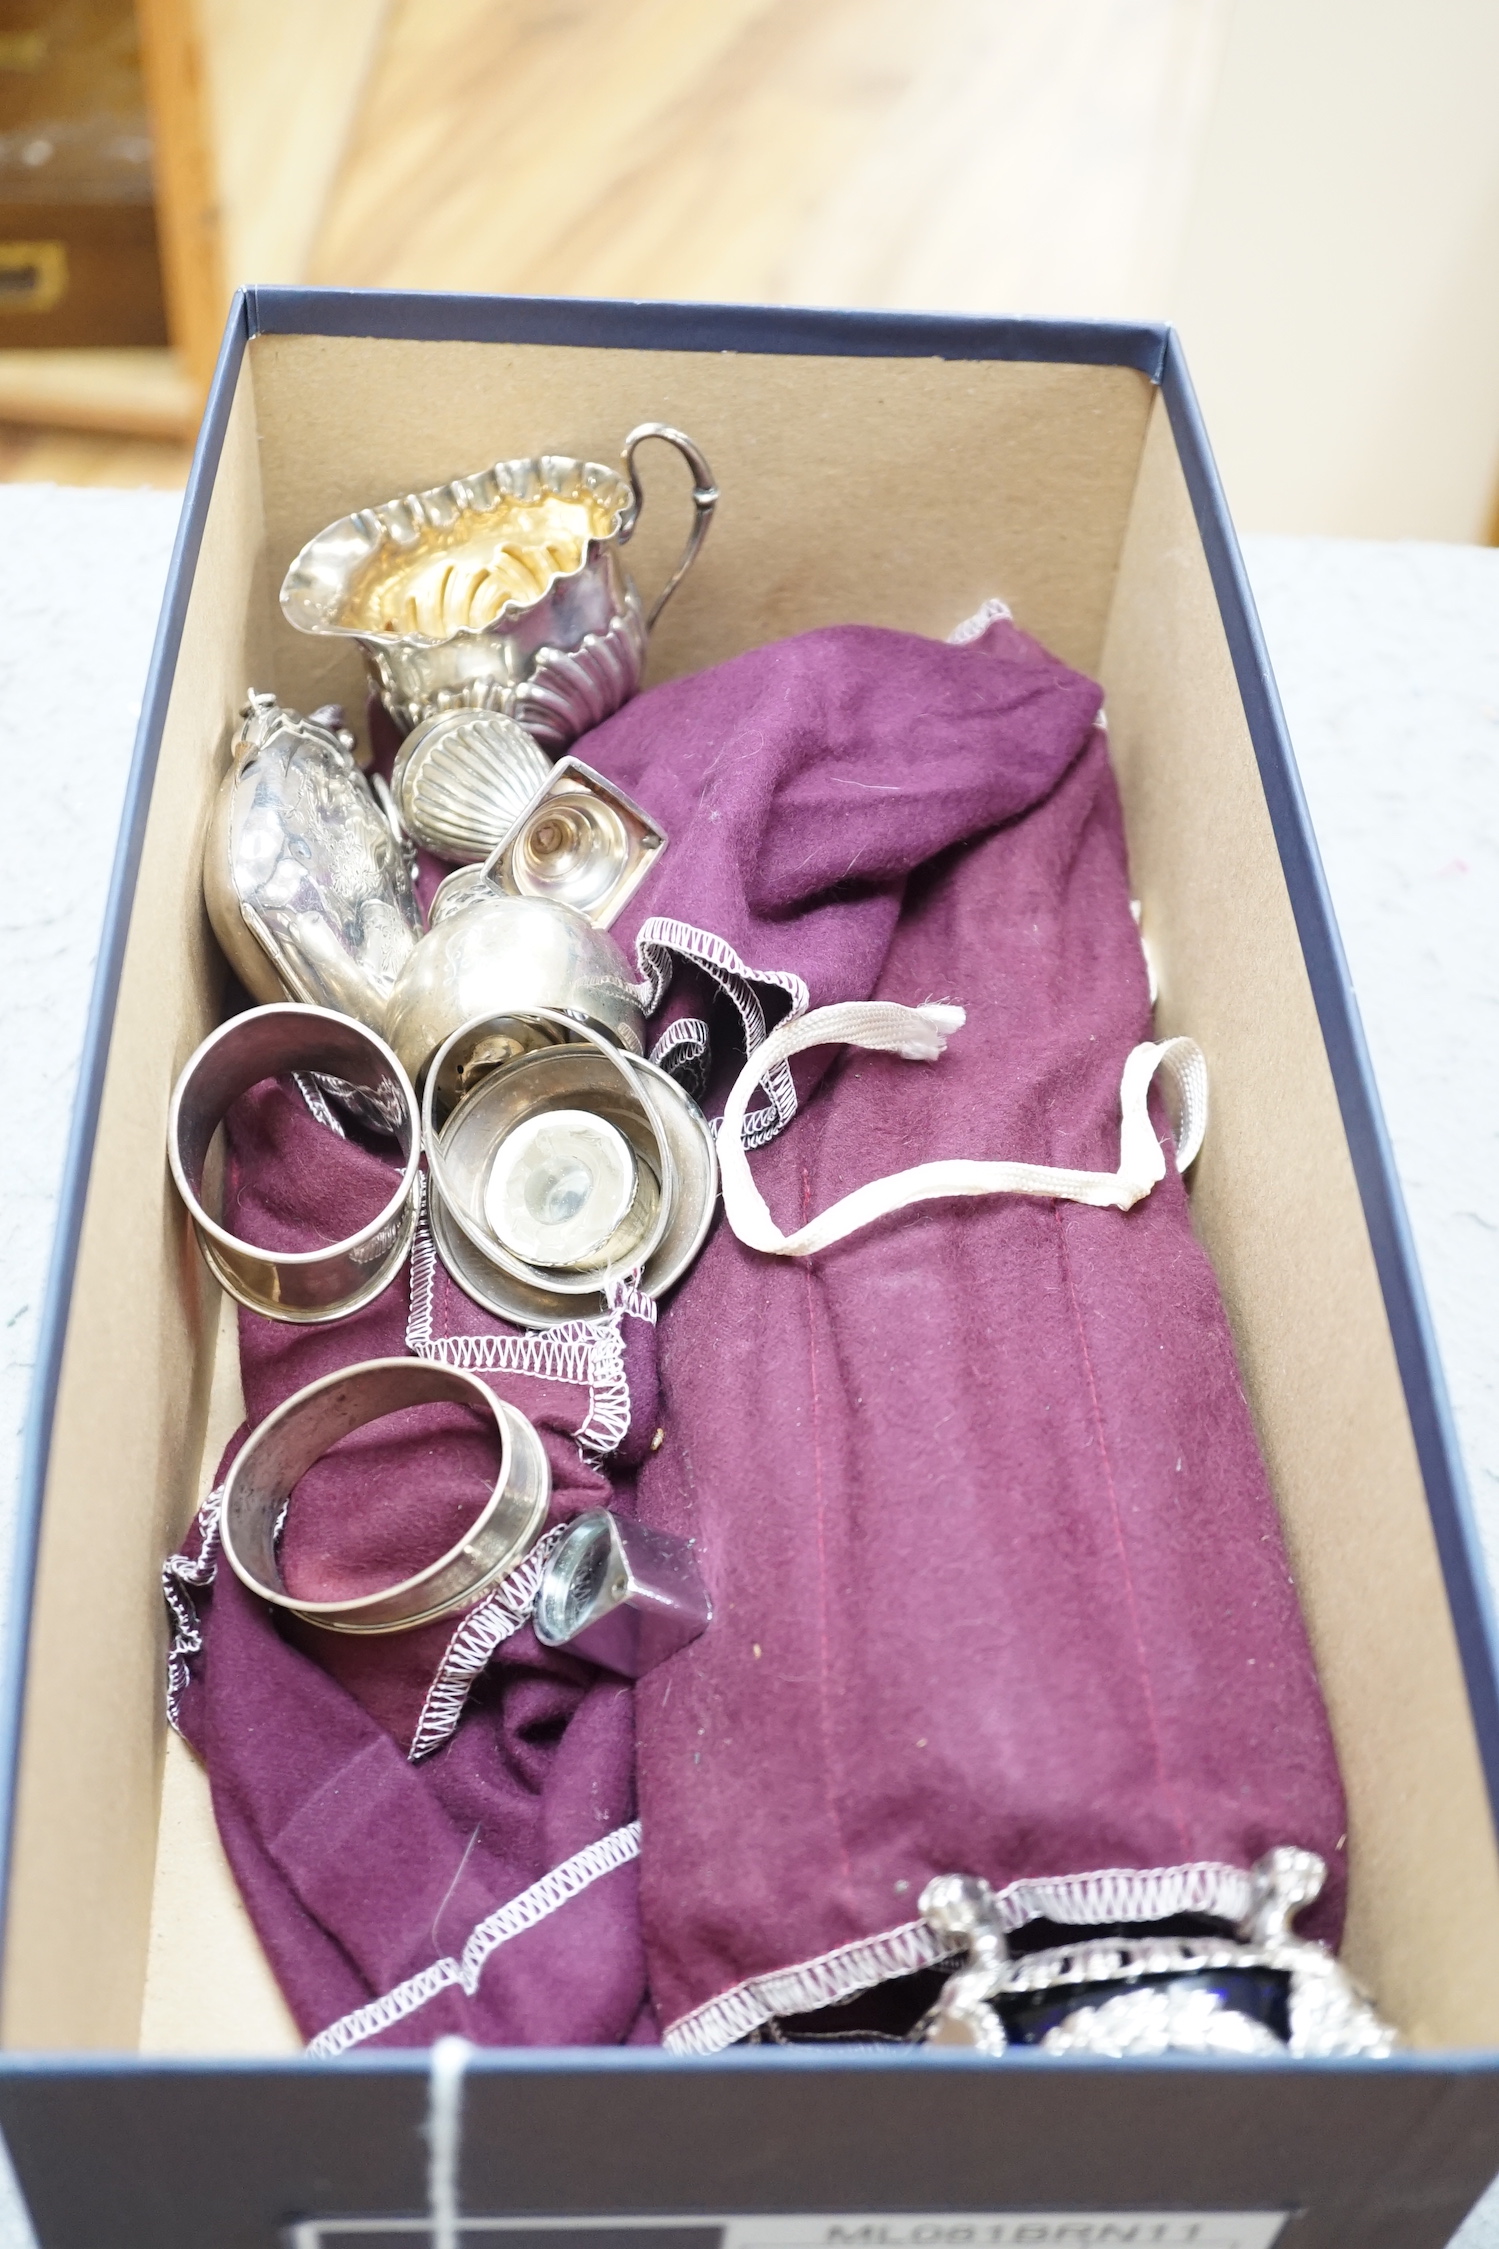 Sundry small silver wares including a pair of modern wine coasters, purse, mug, jug, napkin rings, etc, three plated salts and twelve sterling handled table knives and twelve dessert knives.